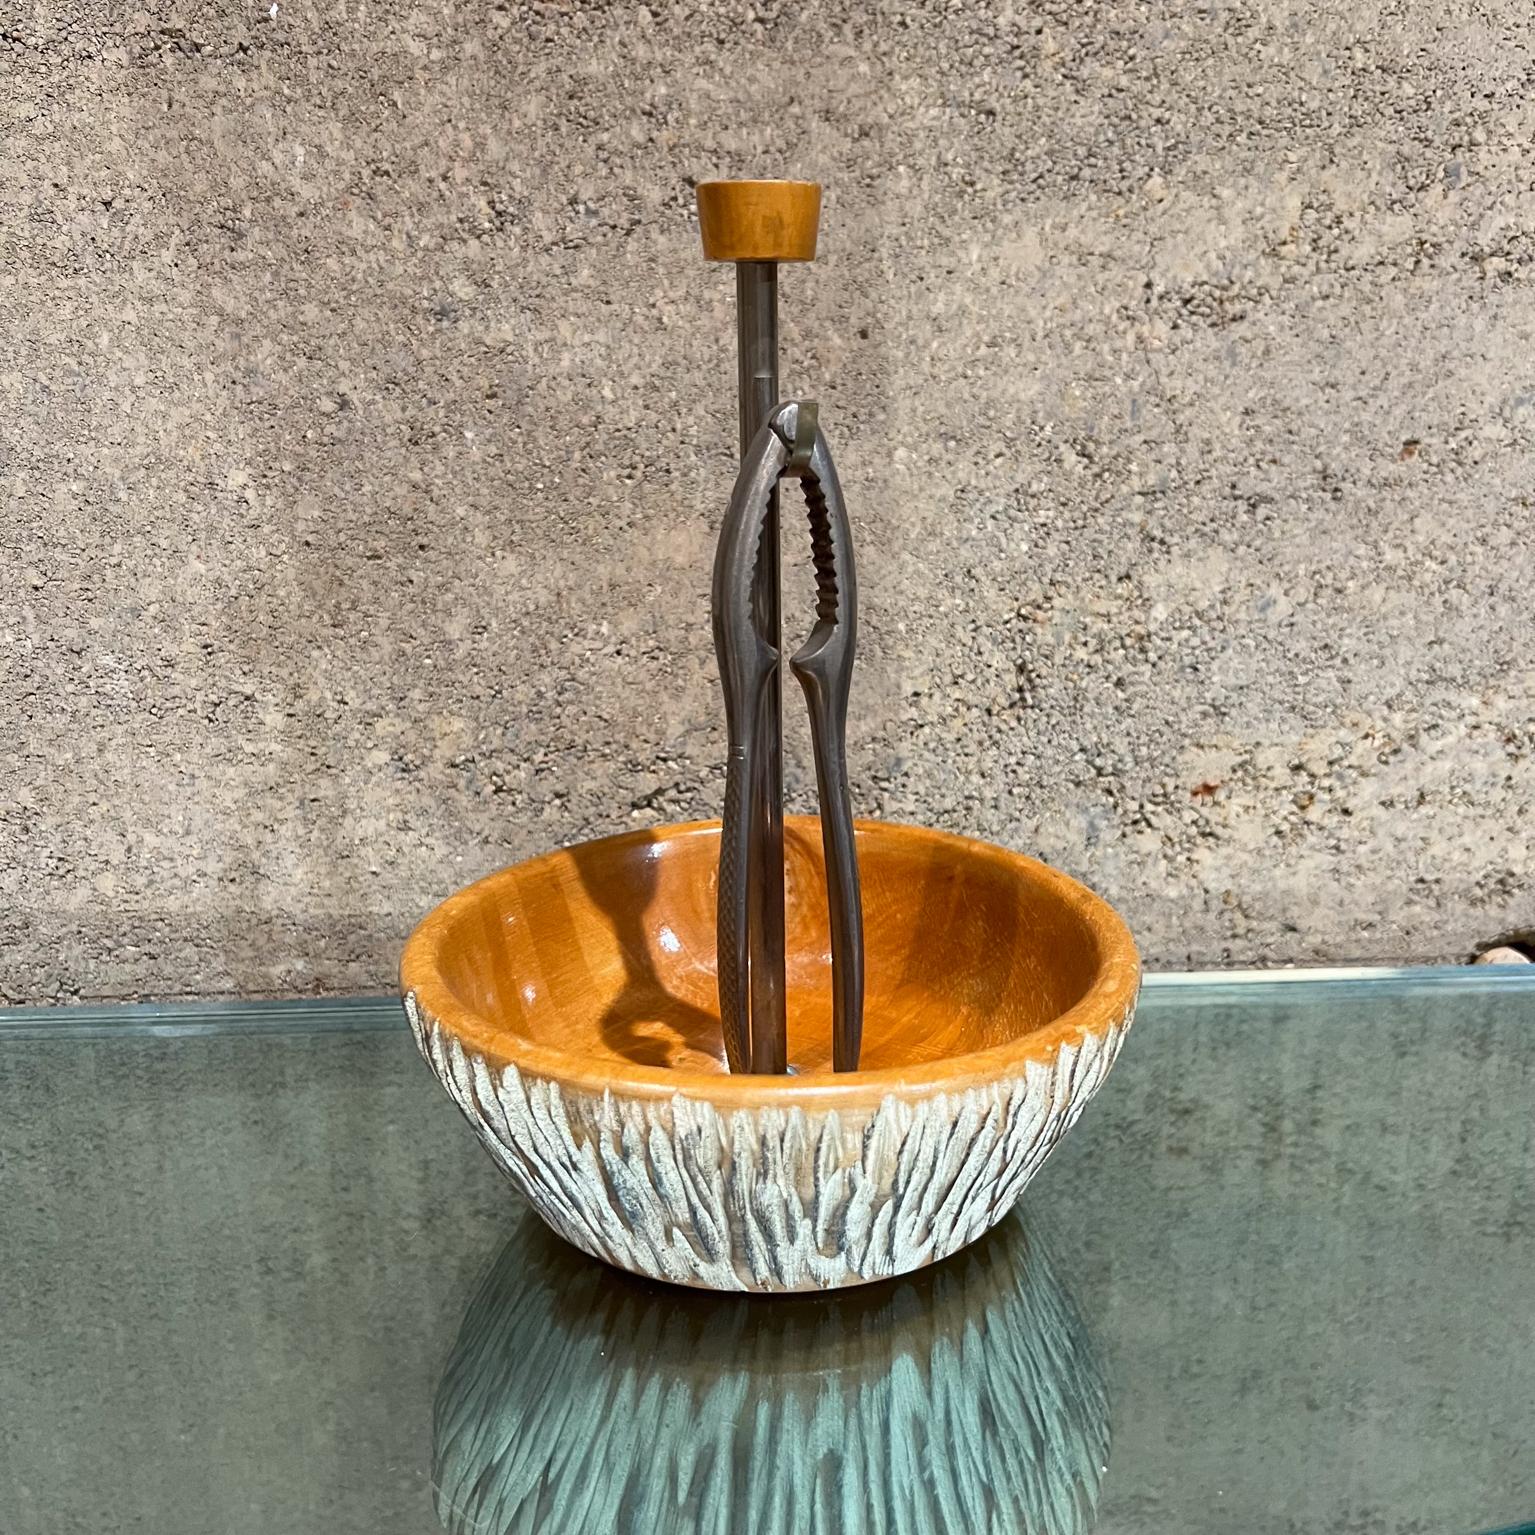 1960s Aldo Tura Sculptural Wood Bowl with Stainless Steel Nutcracker Macabo ITALY 
Nutcracker tool included.
Bowl has a center stem with hook to place nutcracker.
8.5H x 6.63 in diameter
Maker Stamped Macabo designed by Aldo Tura
Original Unrestored